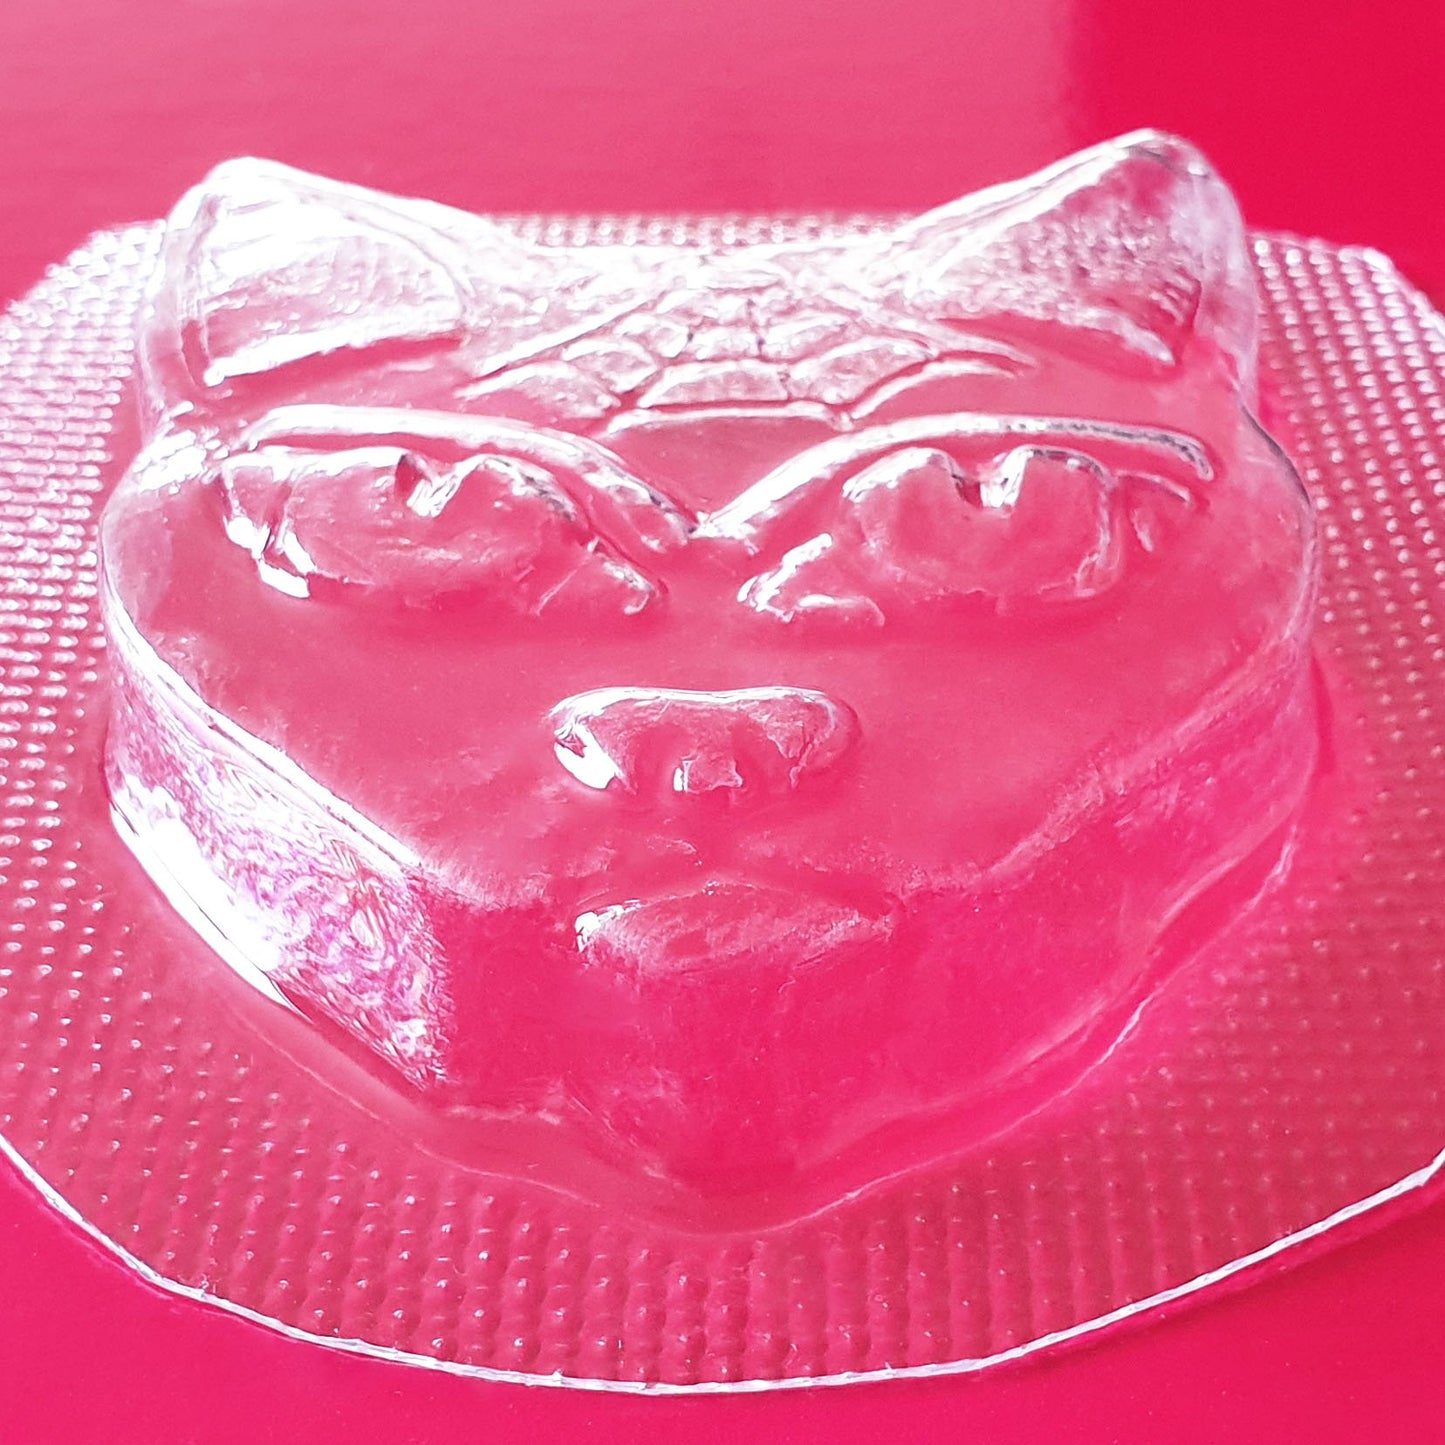 Black Cat Mould | Truly Personal | Bath Bomb, Soap, Resin, Chocolate, Jelly, Wax Melts Mold